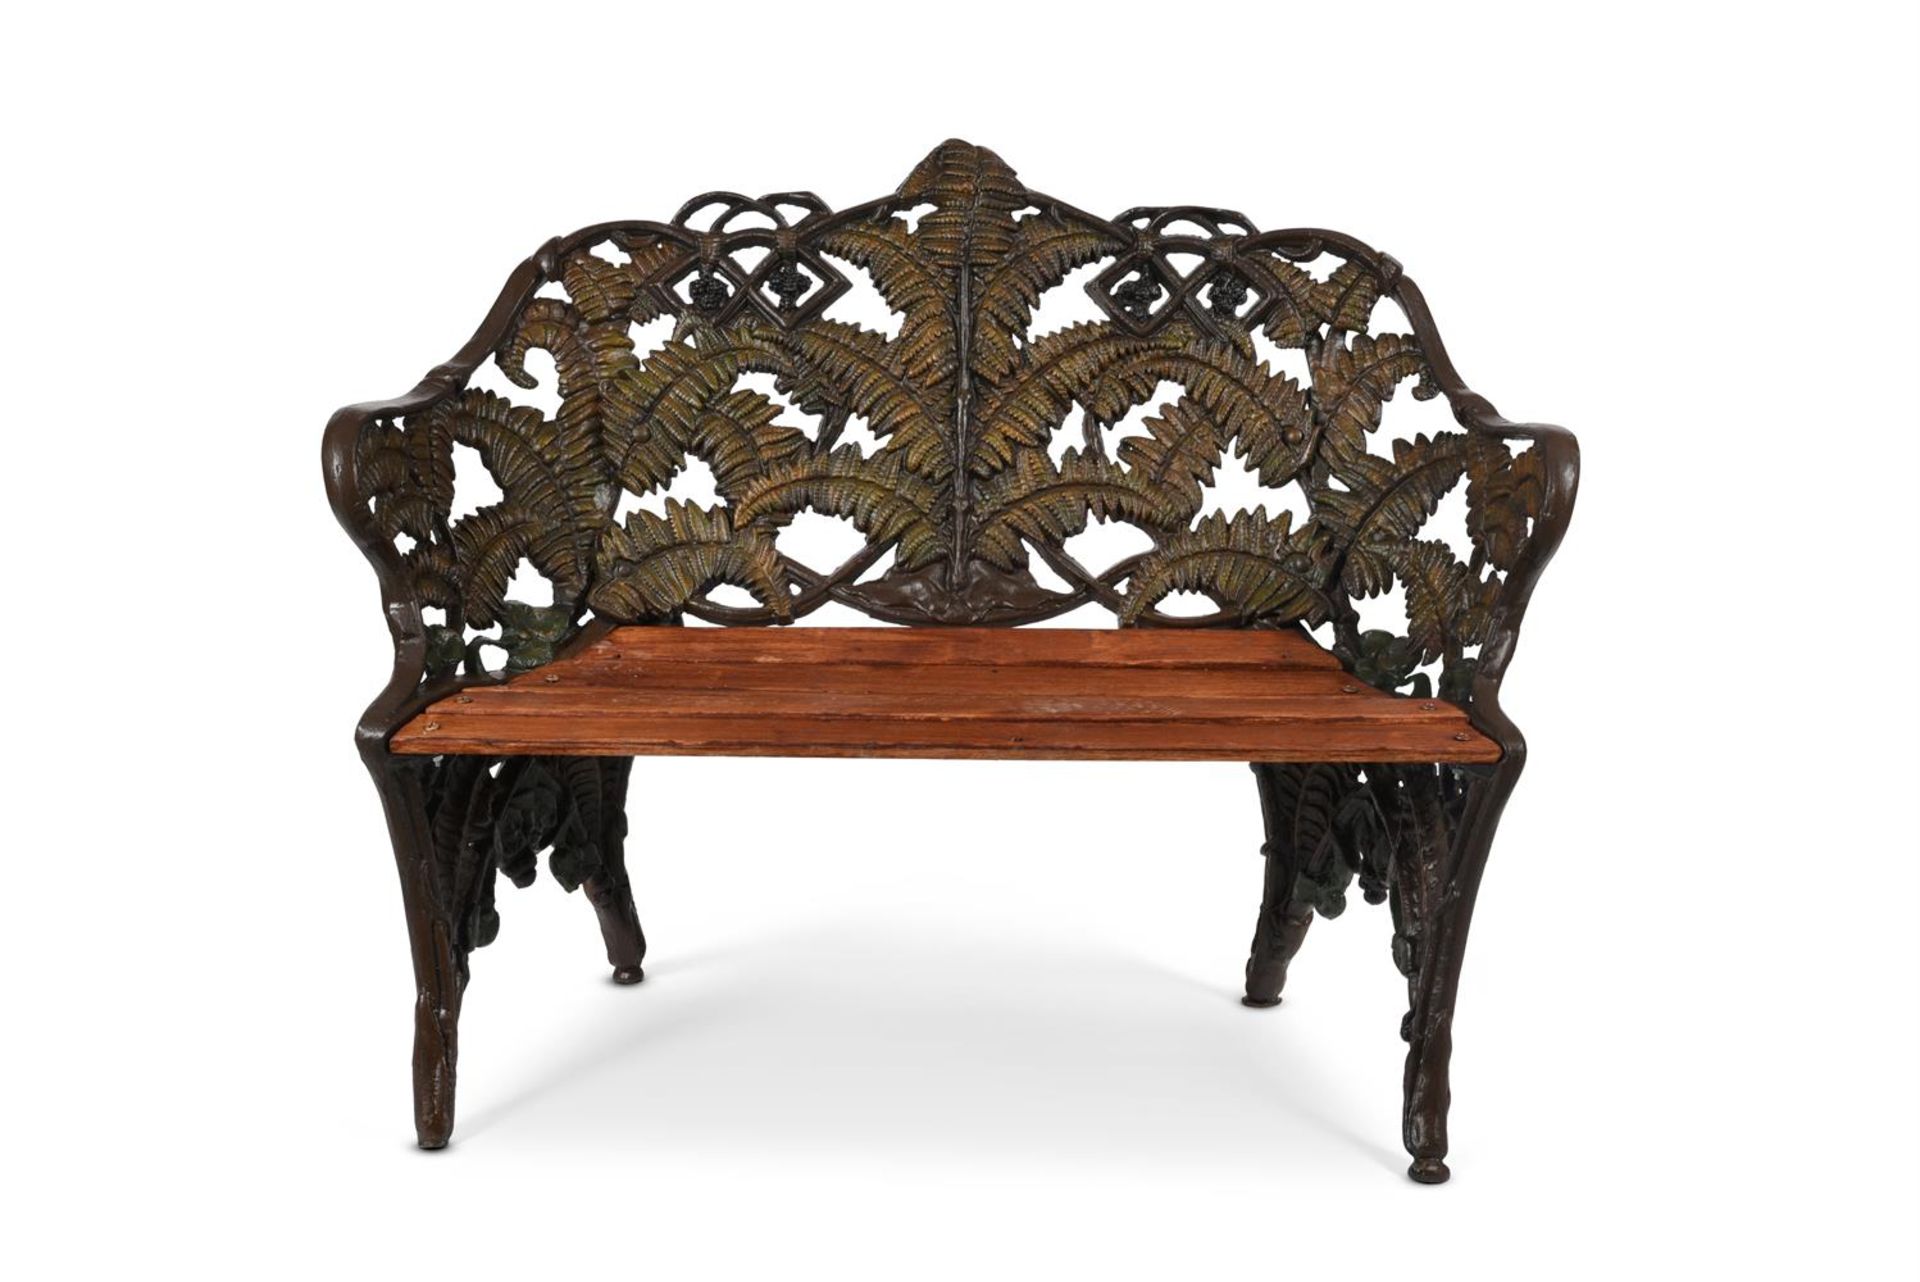 A SMALL CAST IRON GARDEN BENCH IN THE FERN AND BLACKBERRY PATTERN, LATE 19TH CENTURY